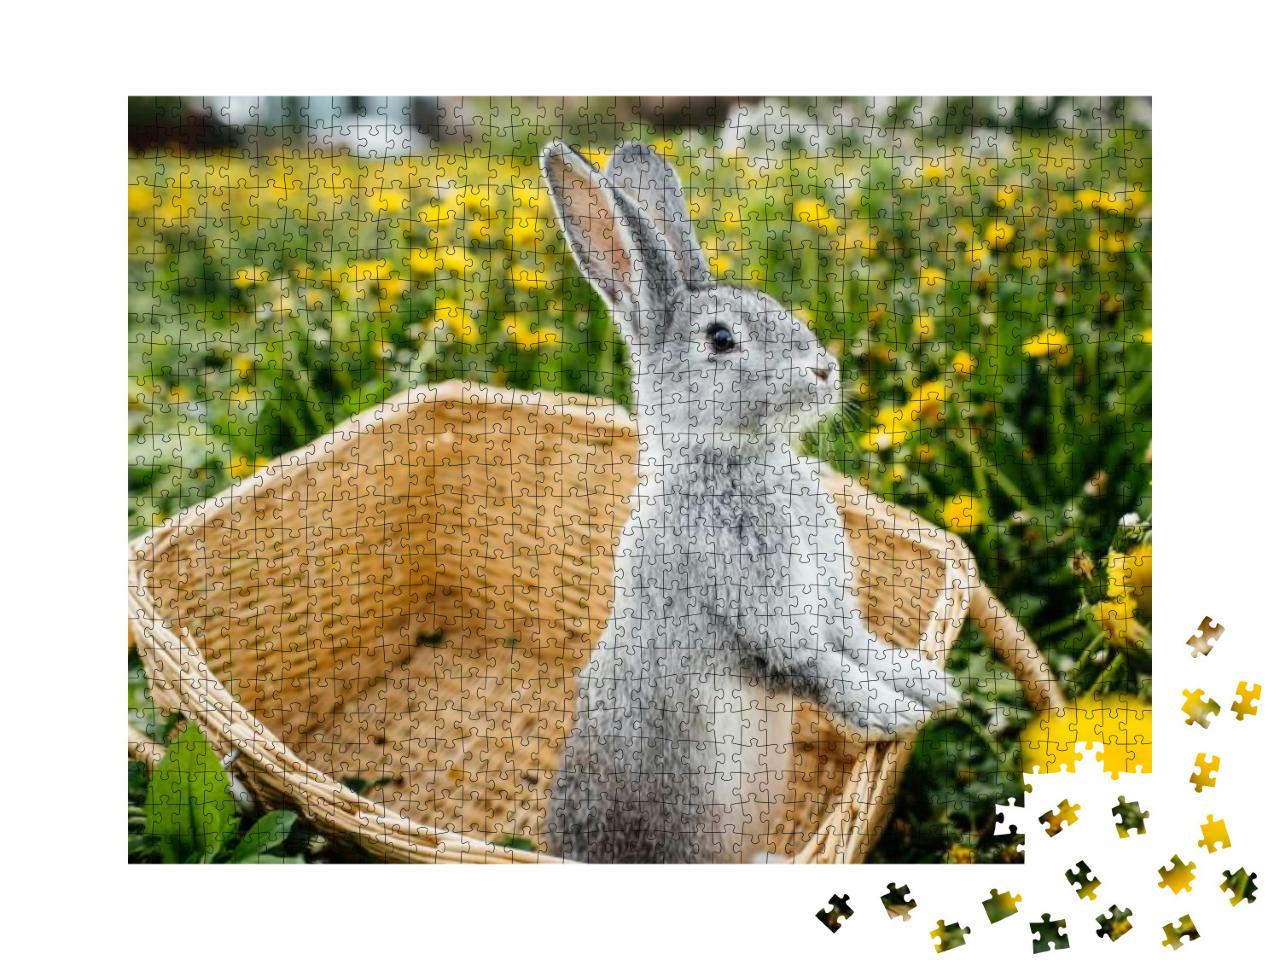 Gray Rabbit in the Garden in the Basket... Jigsaw Puzzle with 1000 pieces